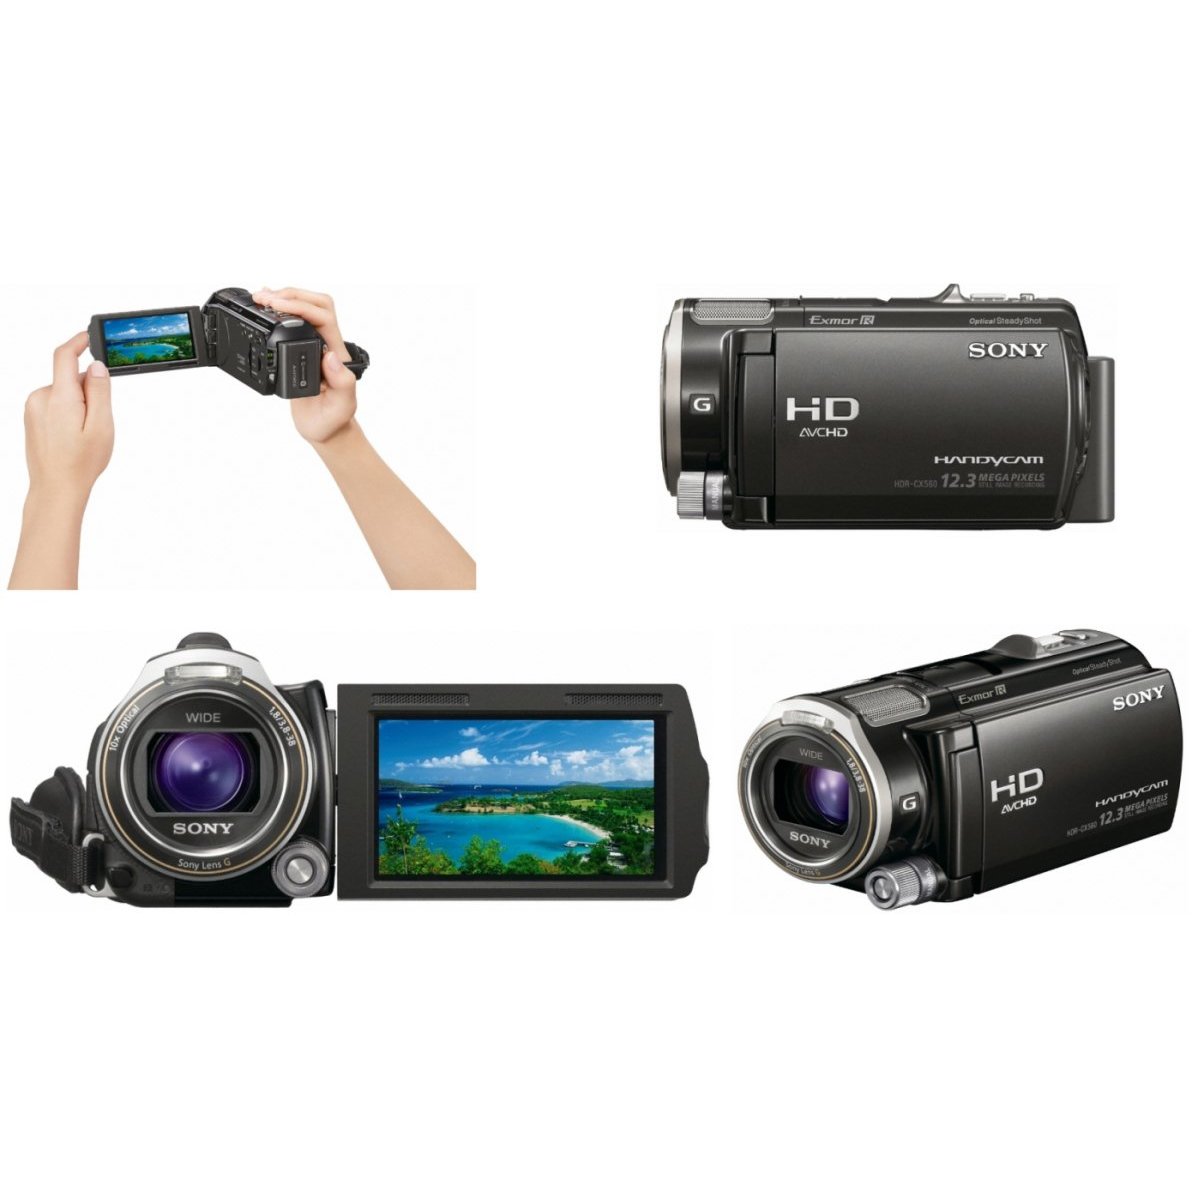 Sony hdr телевизор. Sony HDR-cx560e. Видеокамера Sony HDR-cx560. Sony HDR-cx330e. Sony HDR cx810.